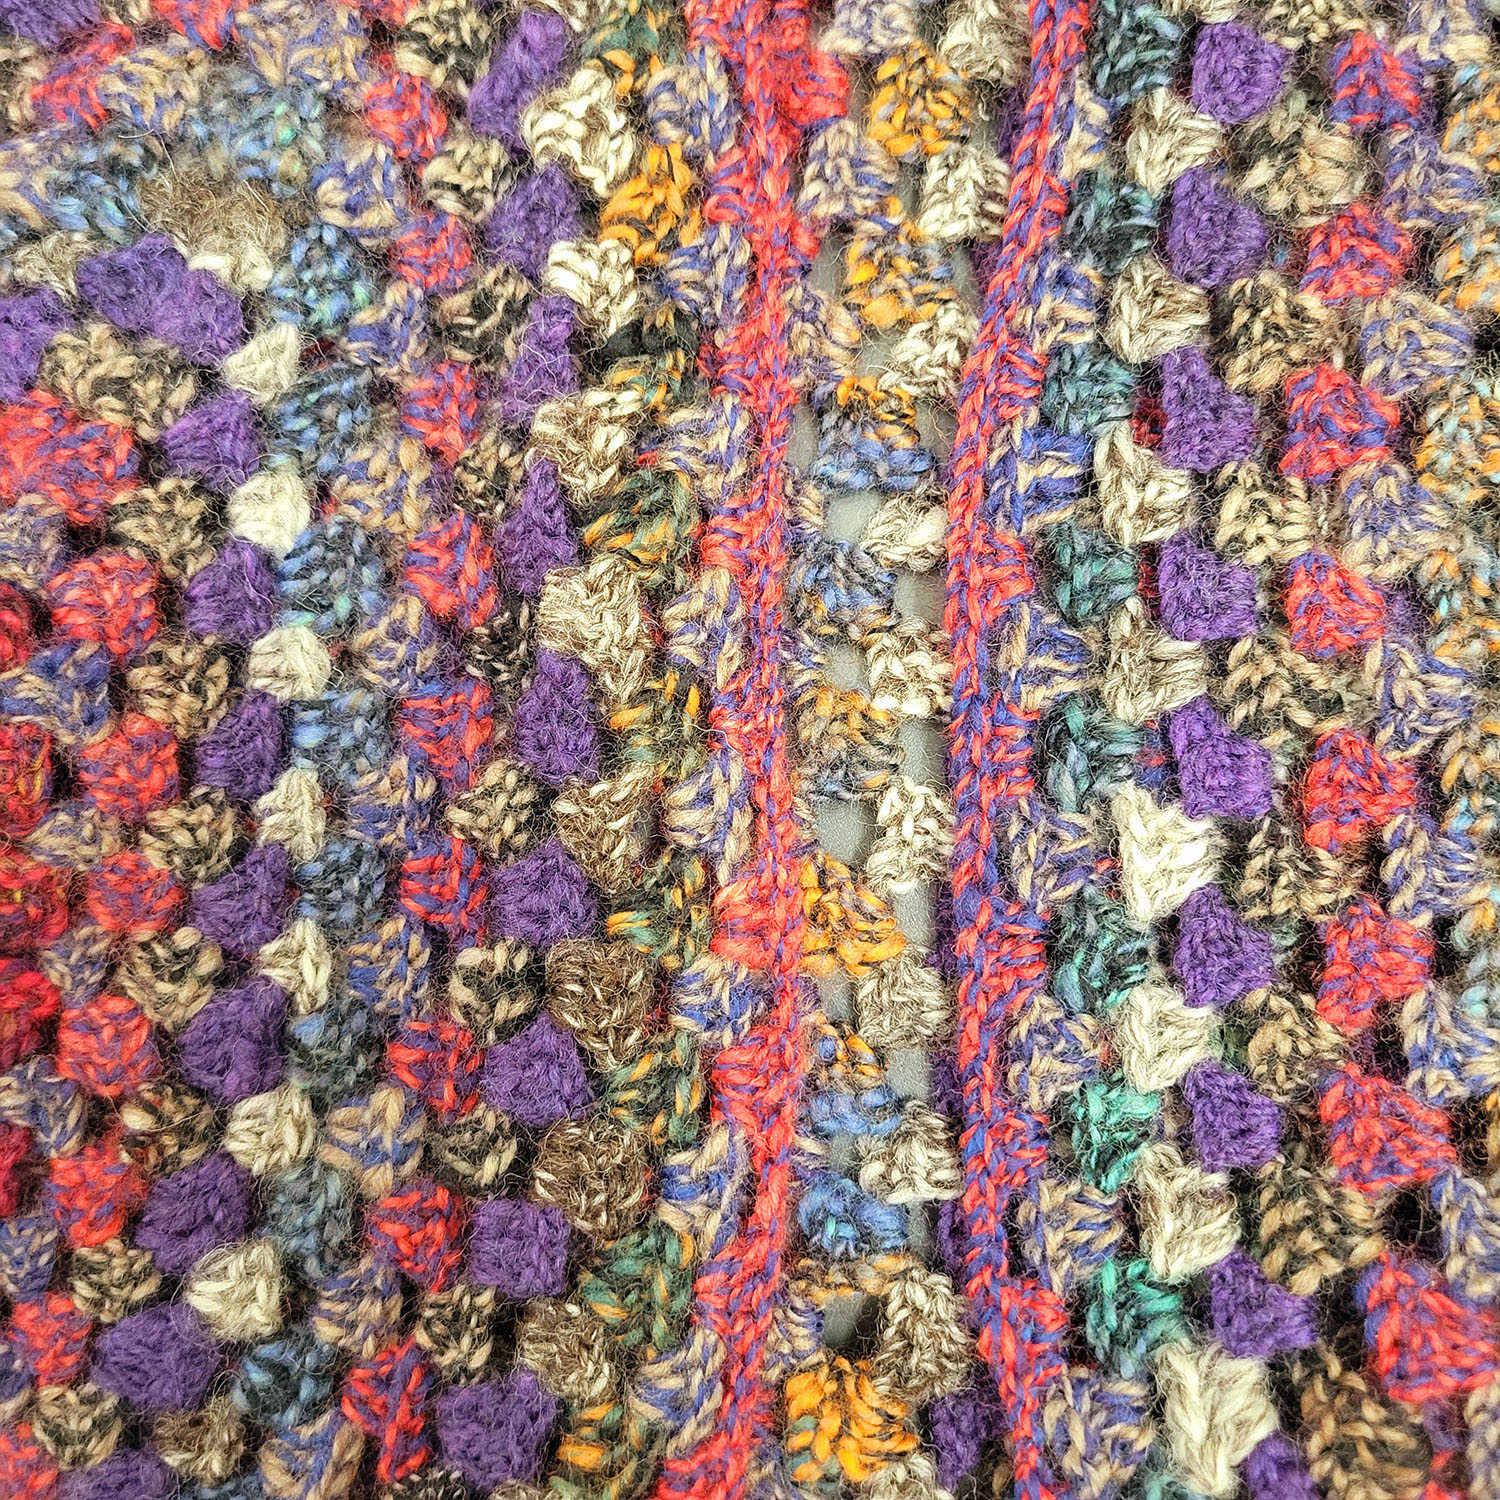 Close-up of the yarn from the hexagon sweater